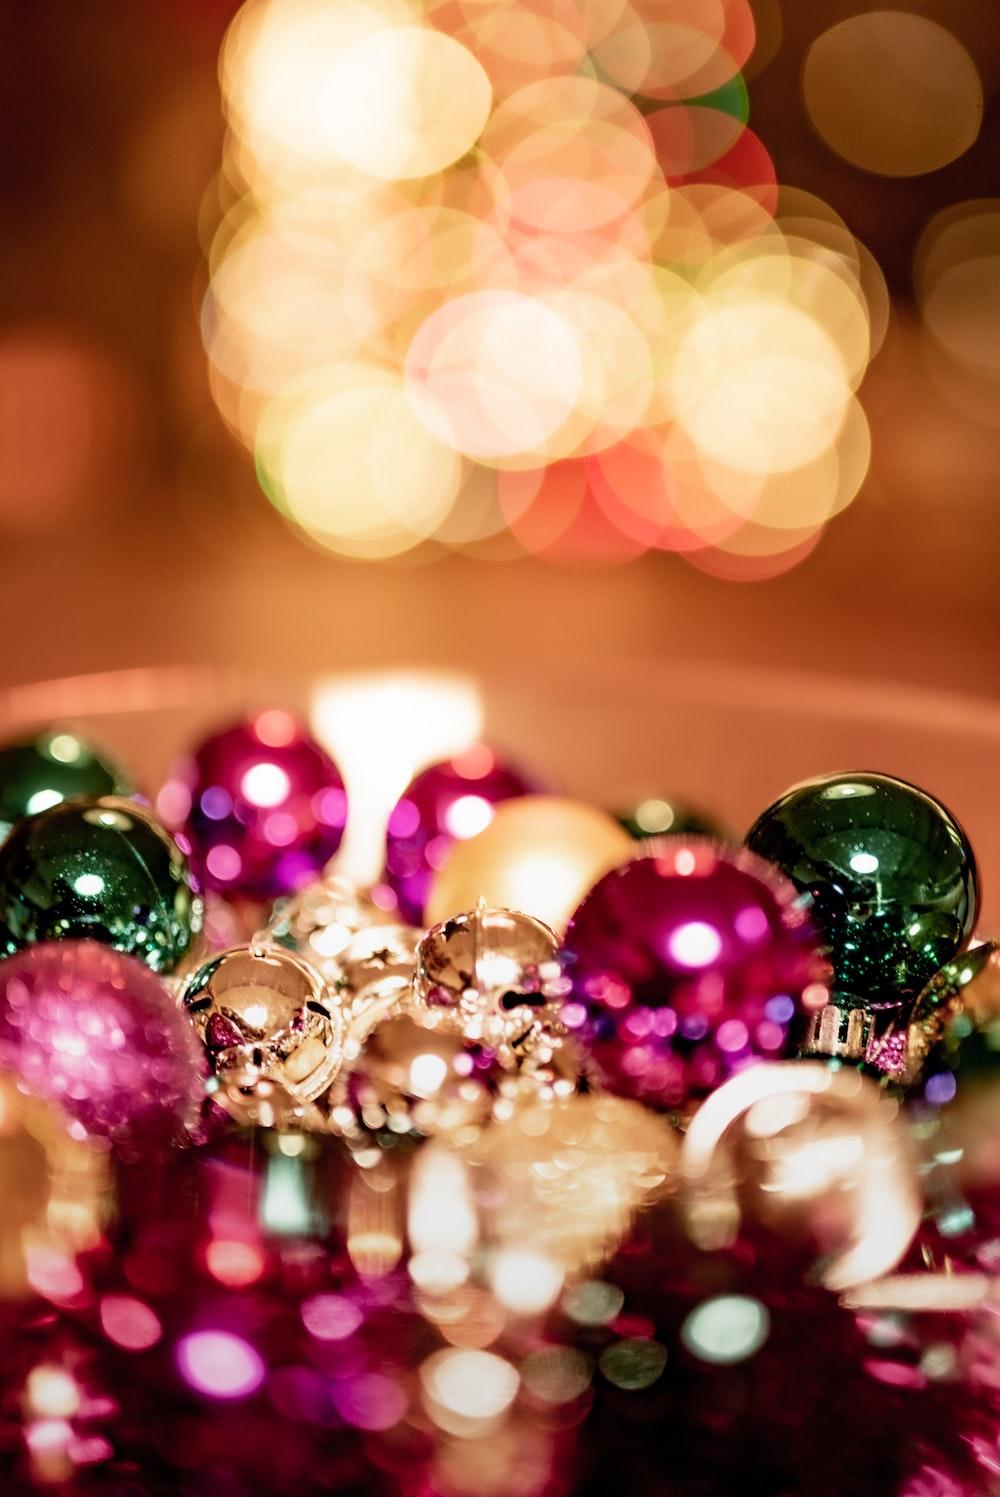 Green And Pink Baubles On Brown Wooden Table Photo